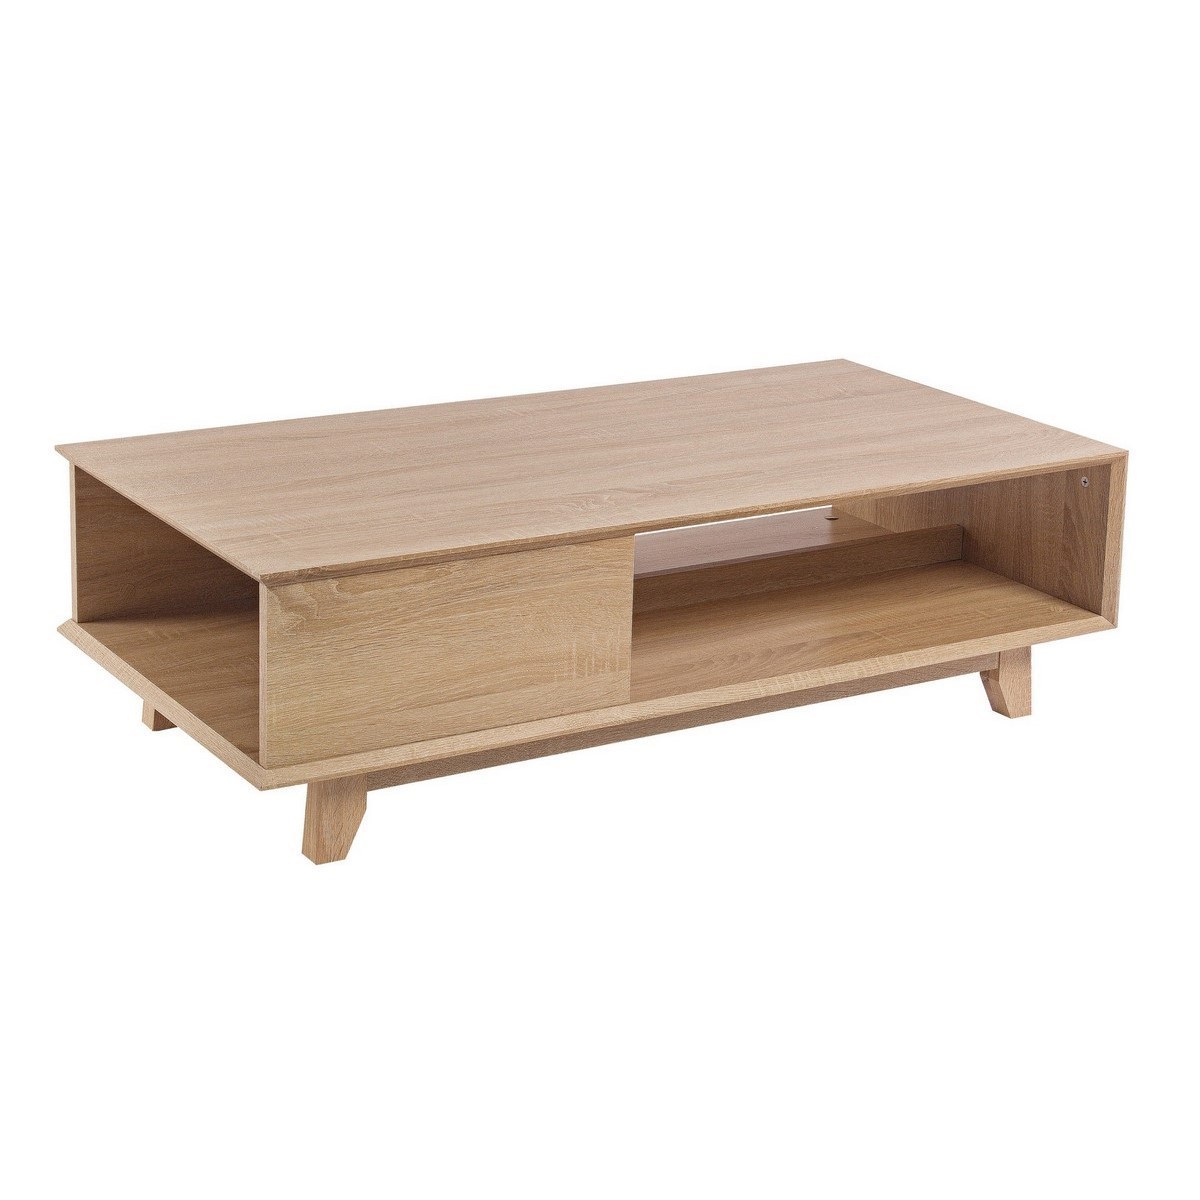 SEVENTY NATURALE COFFEE TABLE 120X60